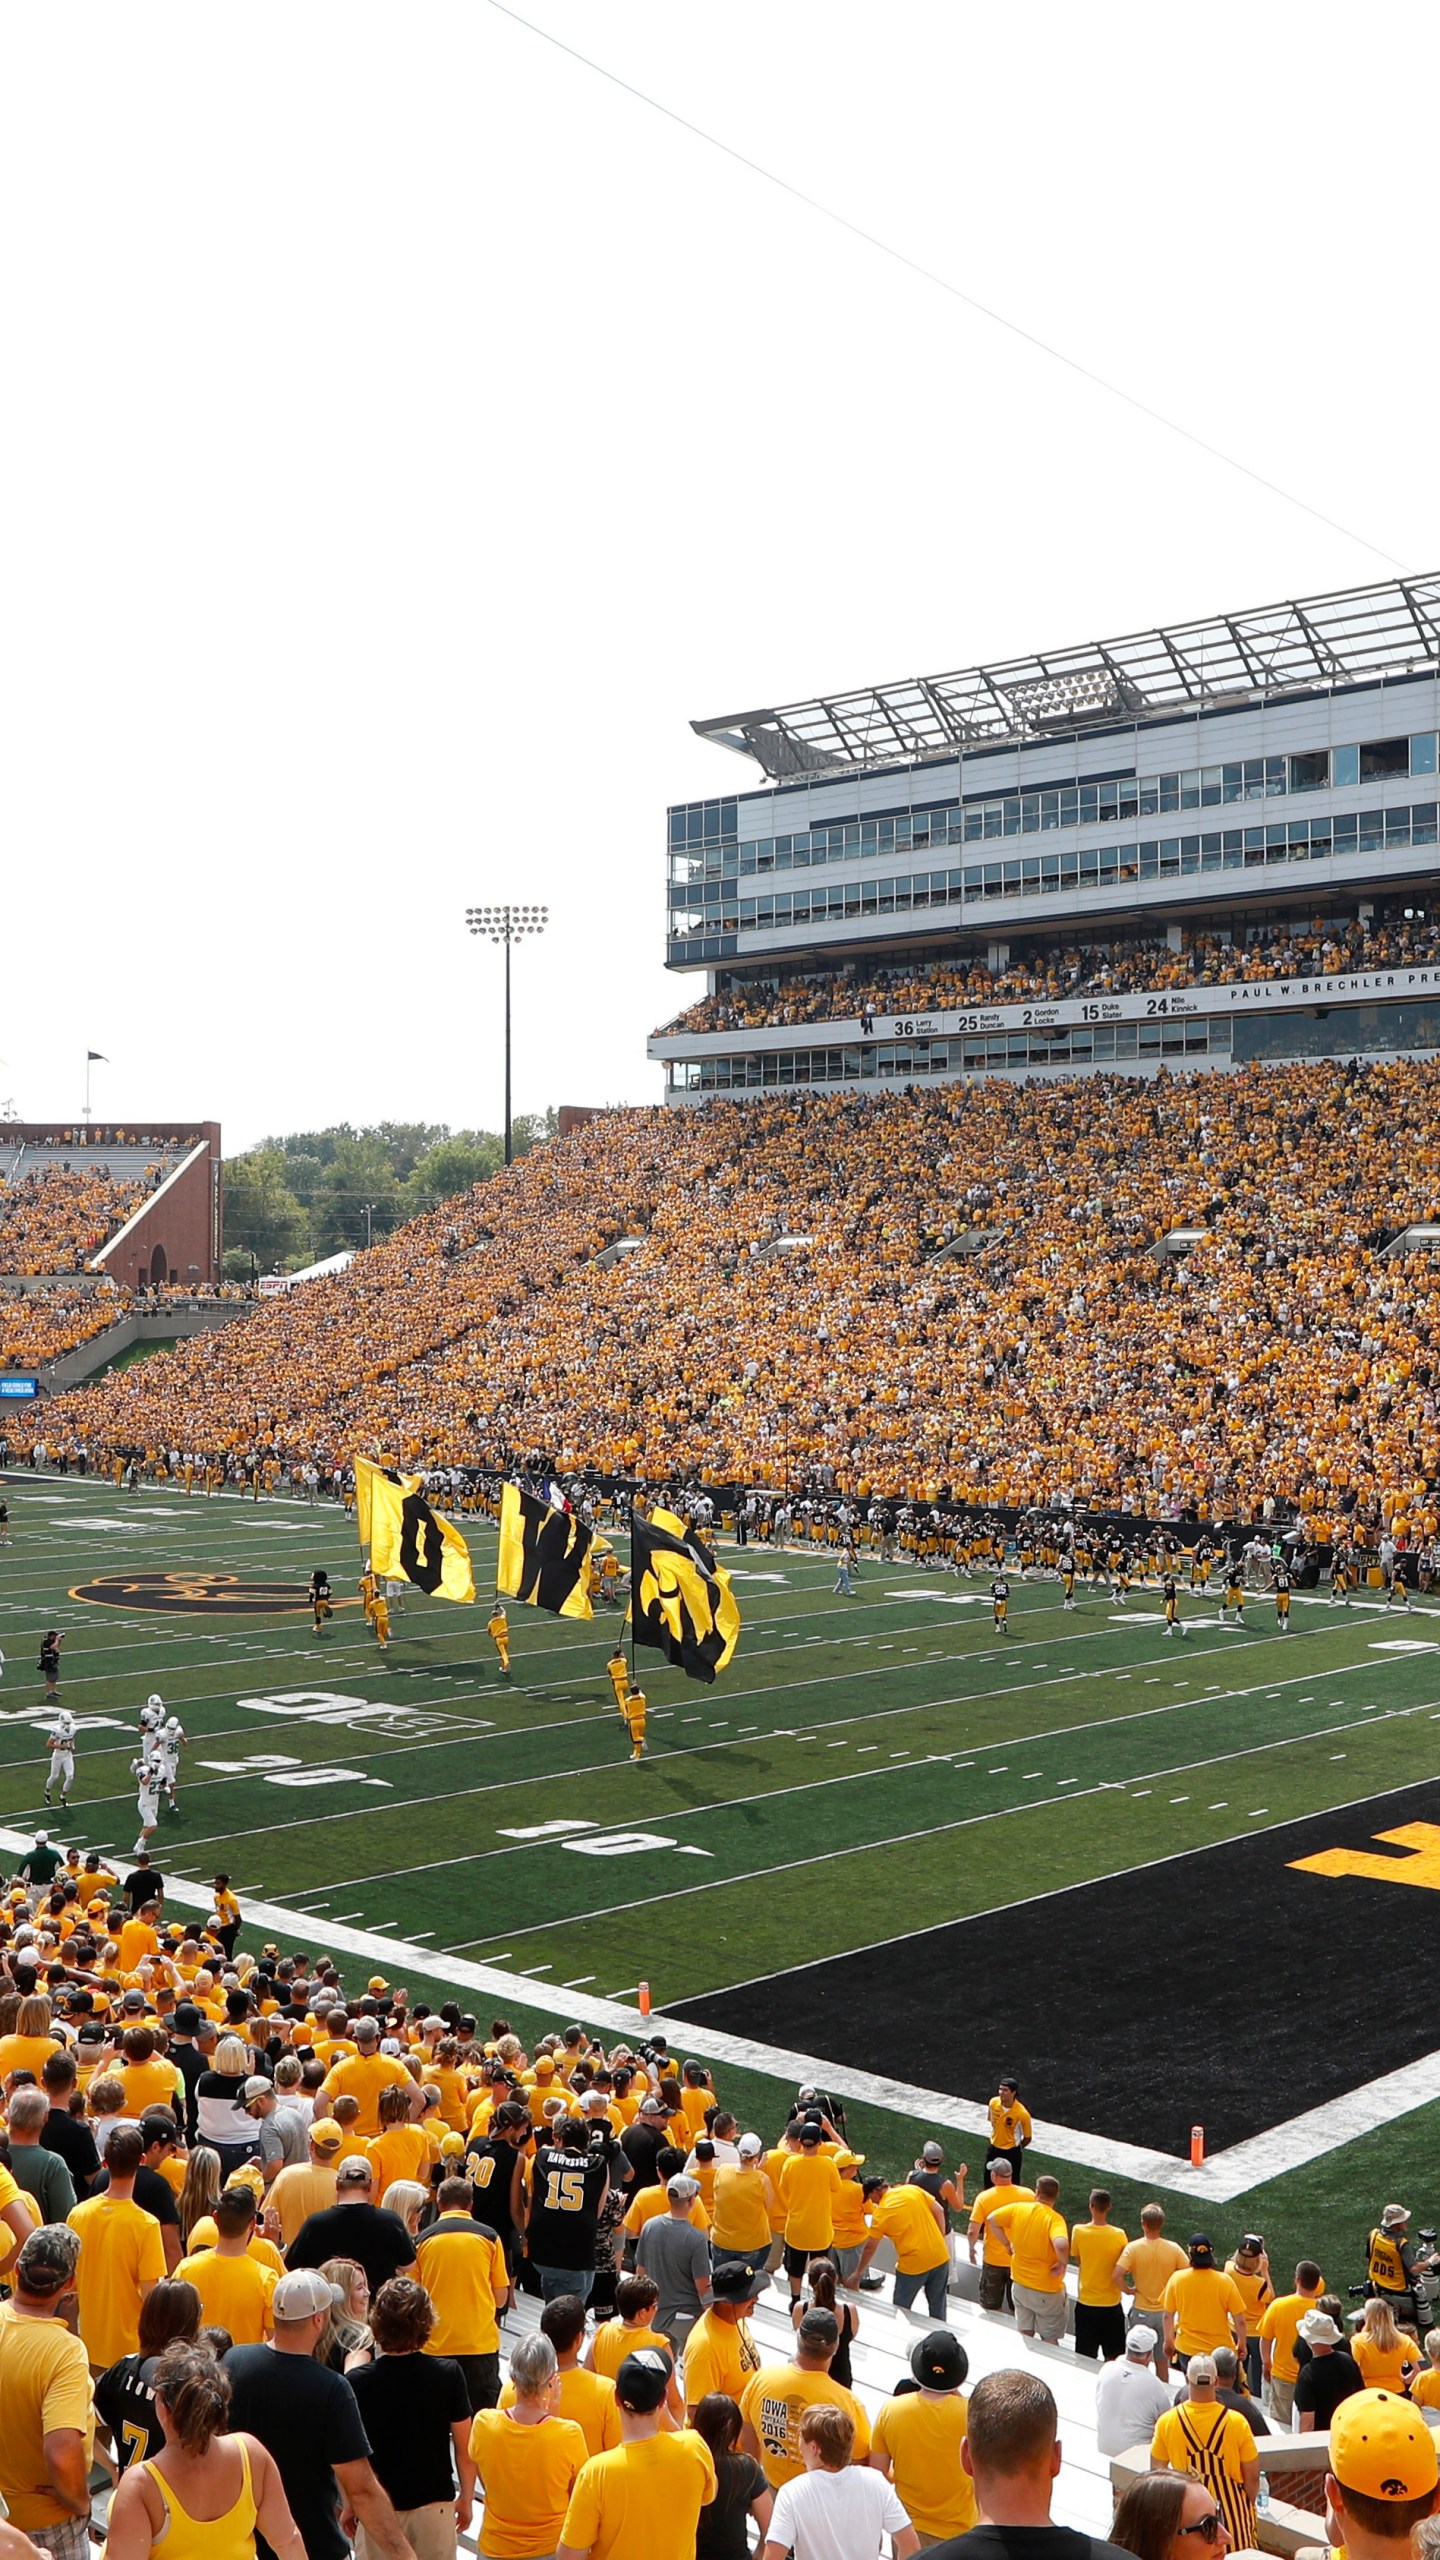 FILE - Fans cheer before an NCAA college football game between Iowa and North Texas at Kinnick Stadium in Iowa City, Iowa, Sept. 16, 2017. The University of Iowa announced 26 of its athletes across five sports are alleged to have participated in sports wagering in violation of NCAA rules. (AP Photo/Charlie Neibergall, File)